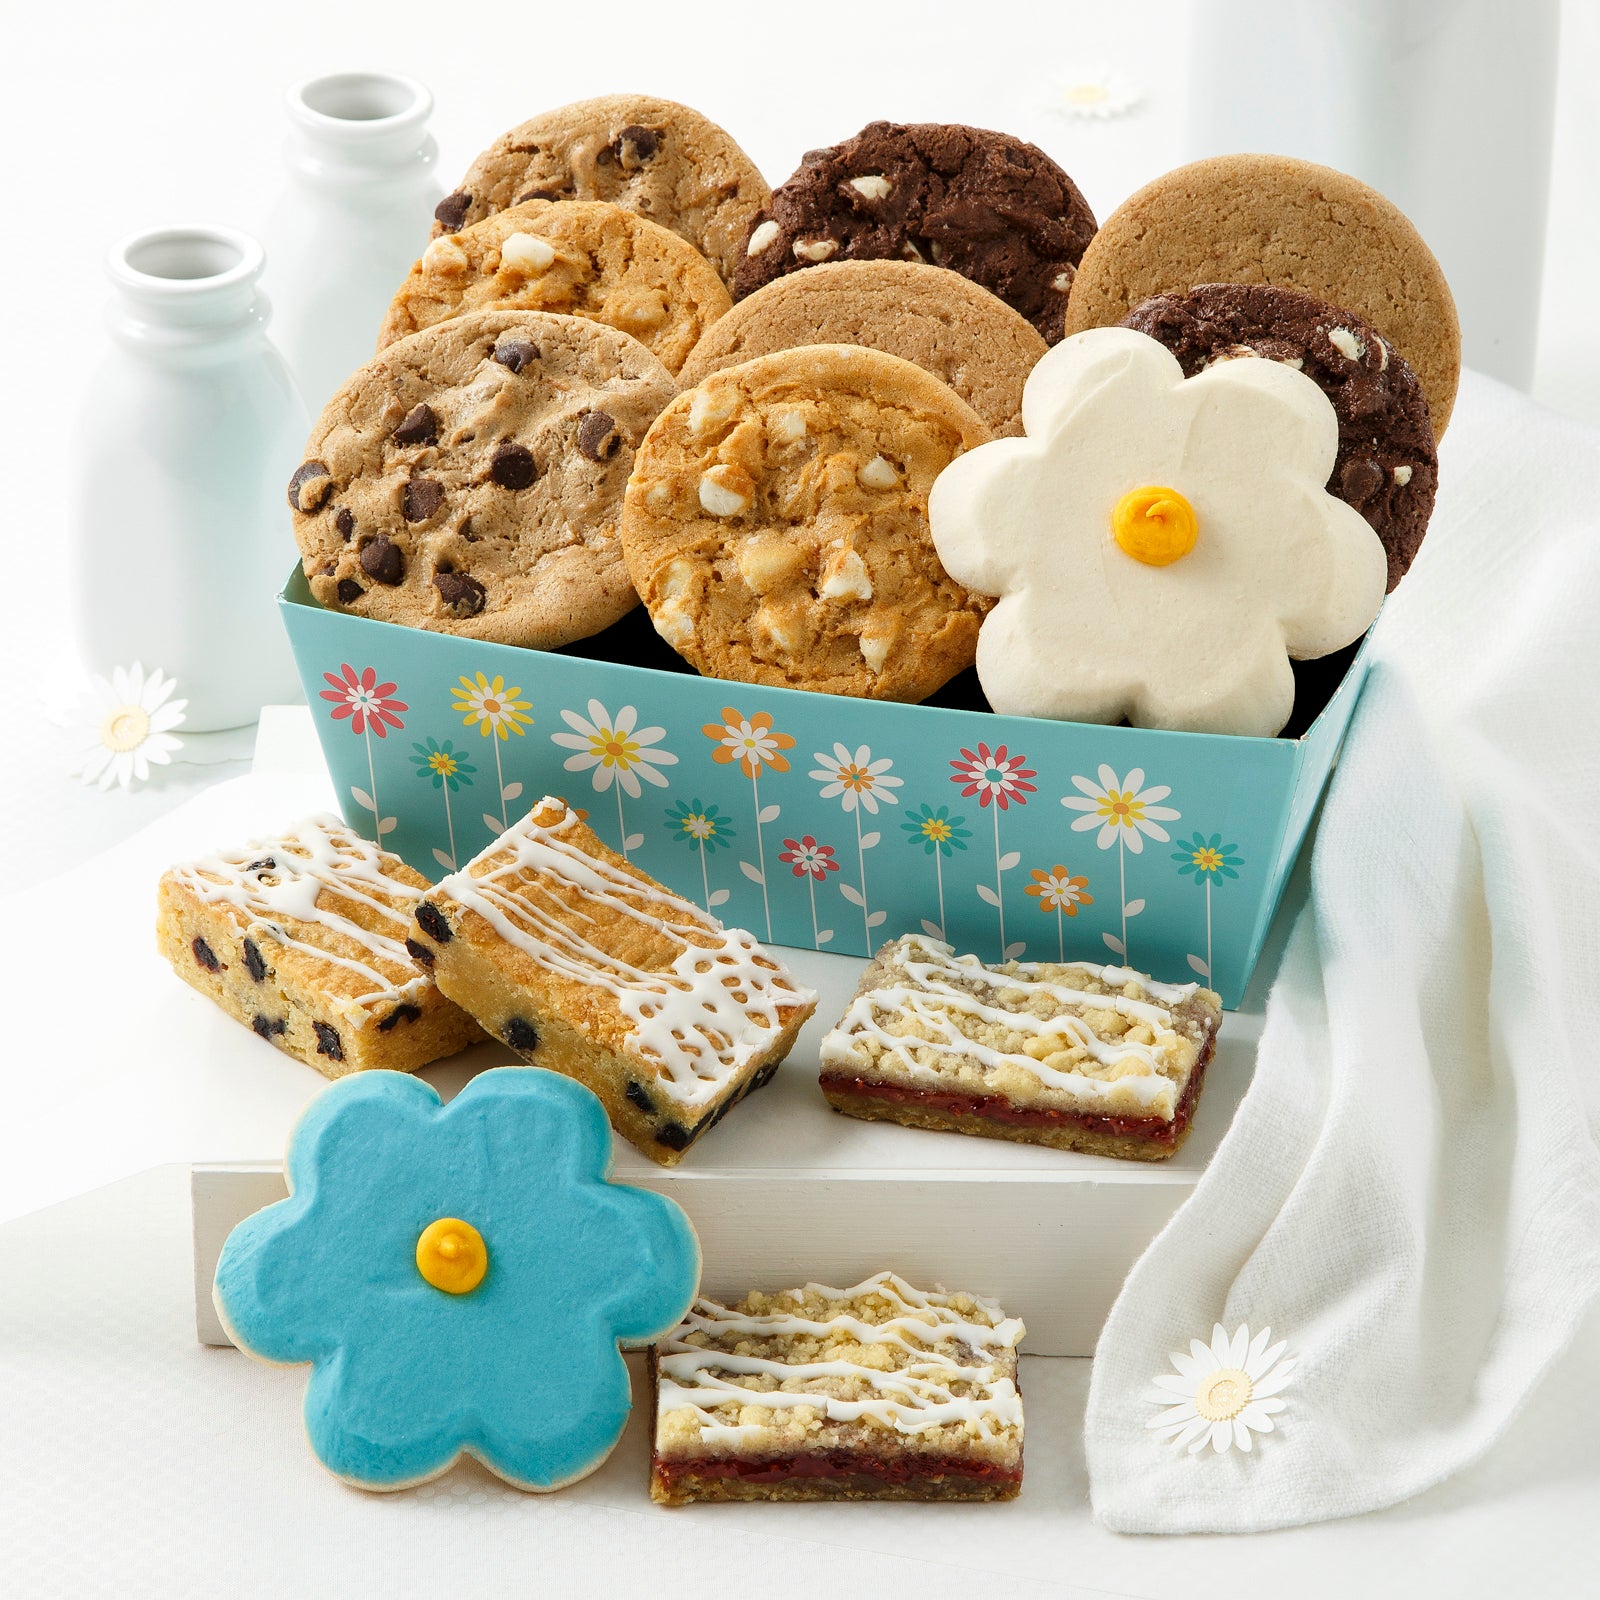 A blue flower crate filled with an assortment of original cookies and a white frosted flower cookie. Placed in front are an assortment of fruit bars and a blue frosted flower cookie.